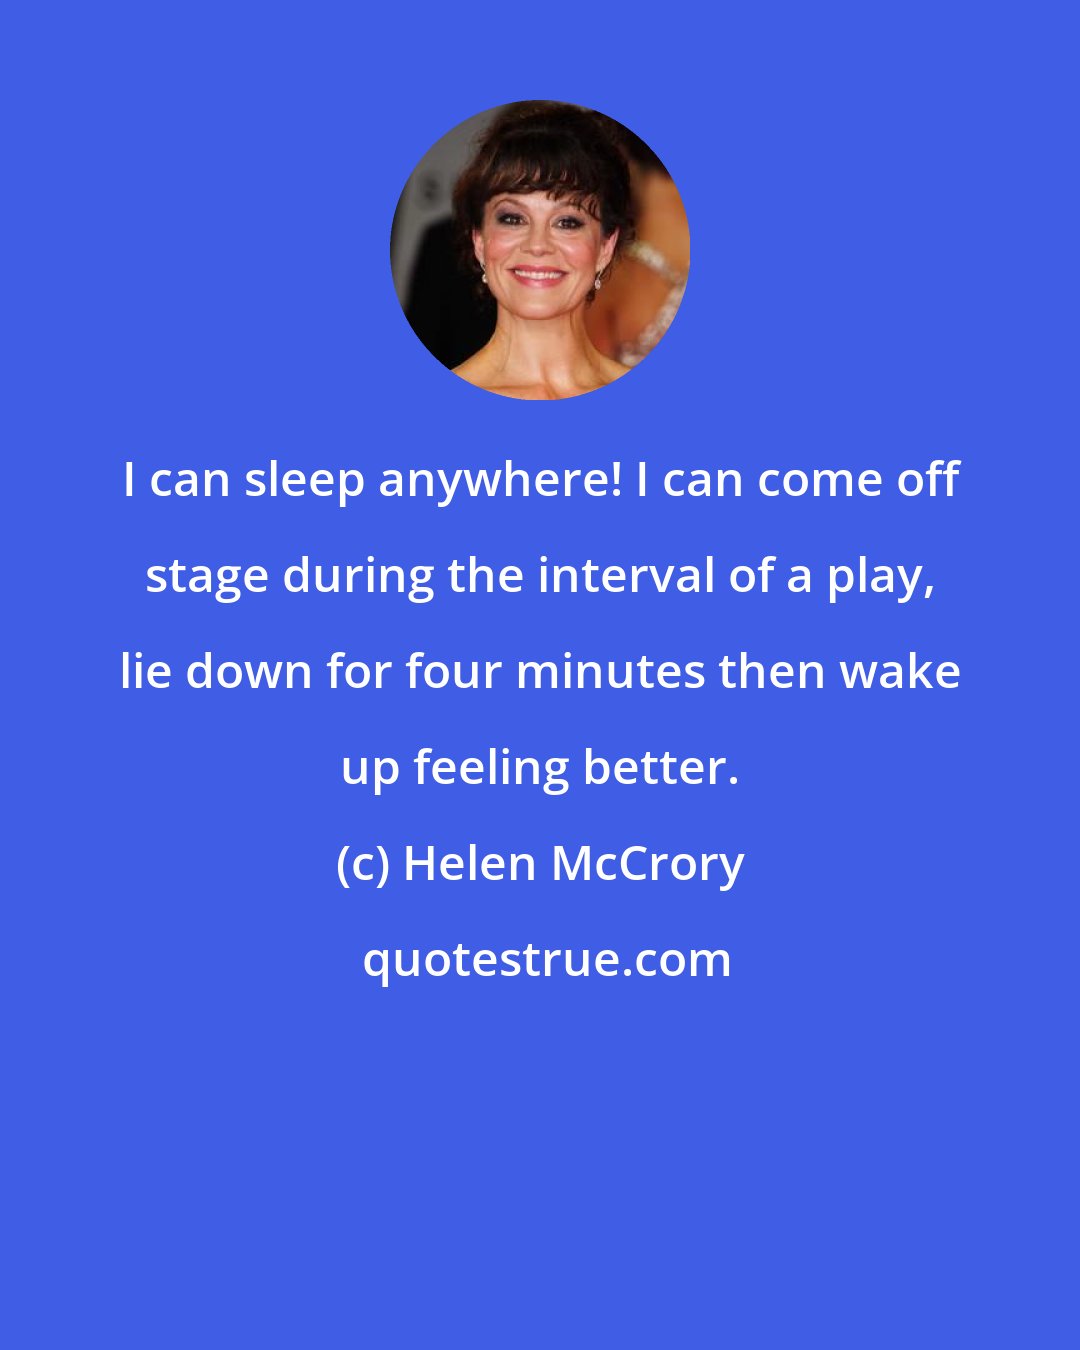 Helen McCrory: I can sleep anywhere! I can come off stage during the interval of a play, lie down for four minutes then wake up feeling better.